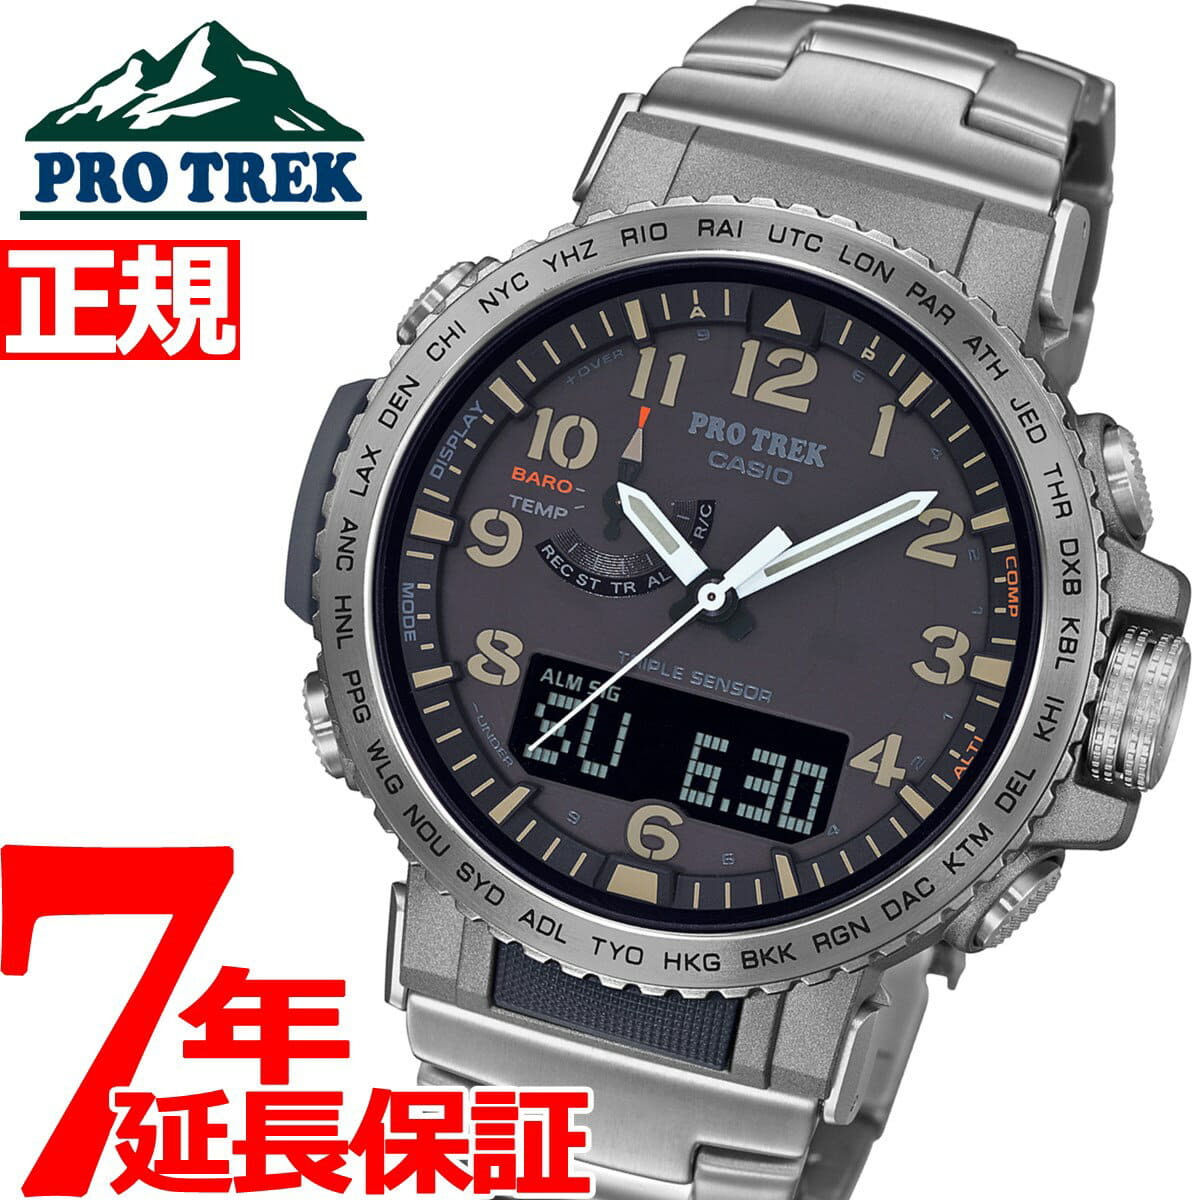 Casio Prw 50t Outlet Shop, UP TO 62% OFF | www.apmusicales.com